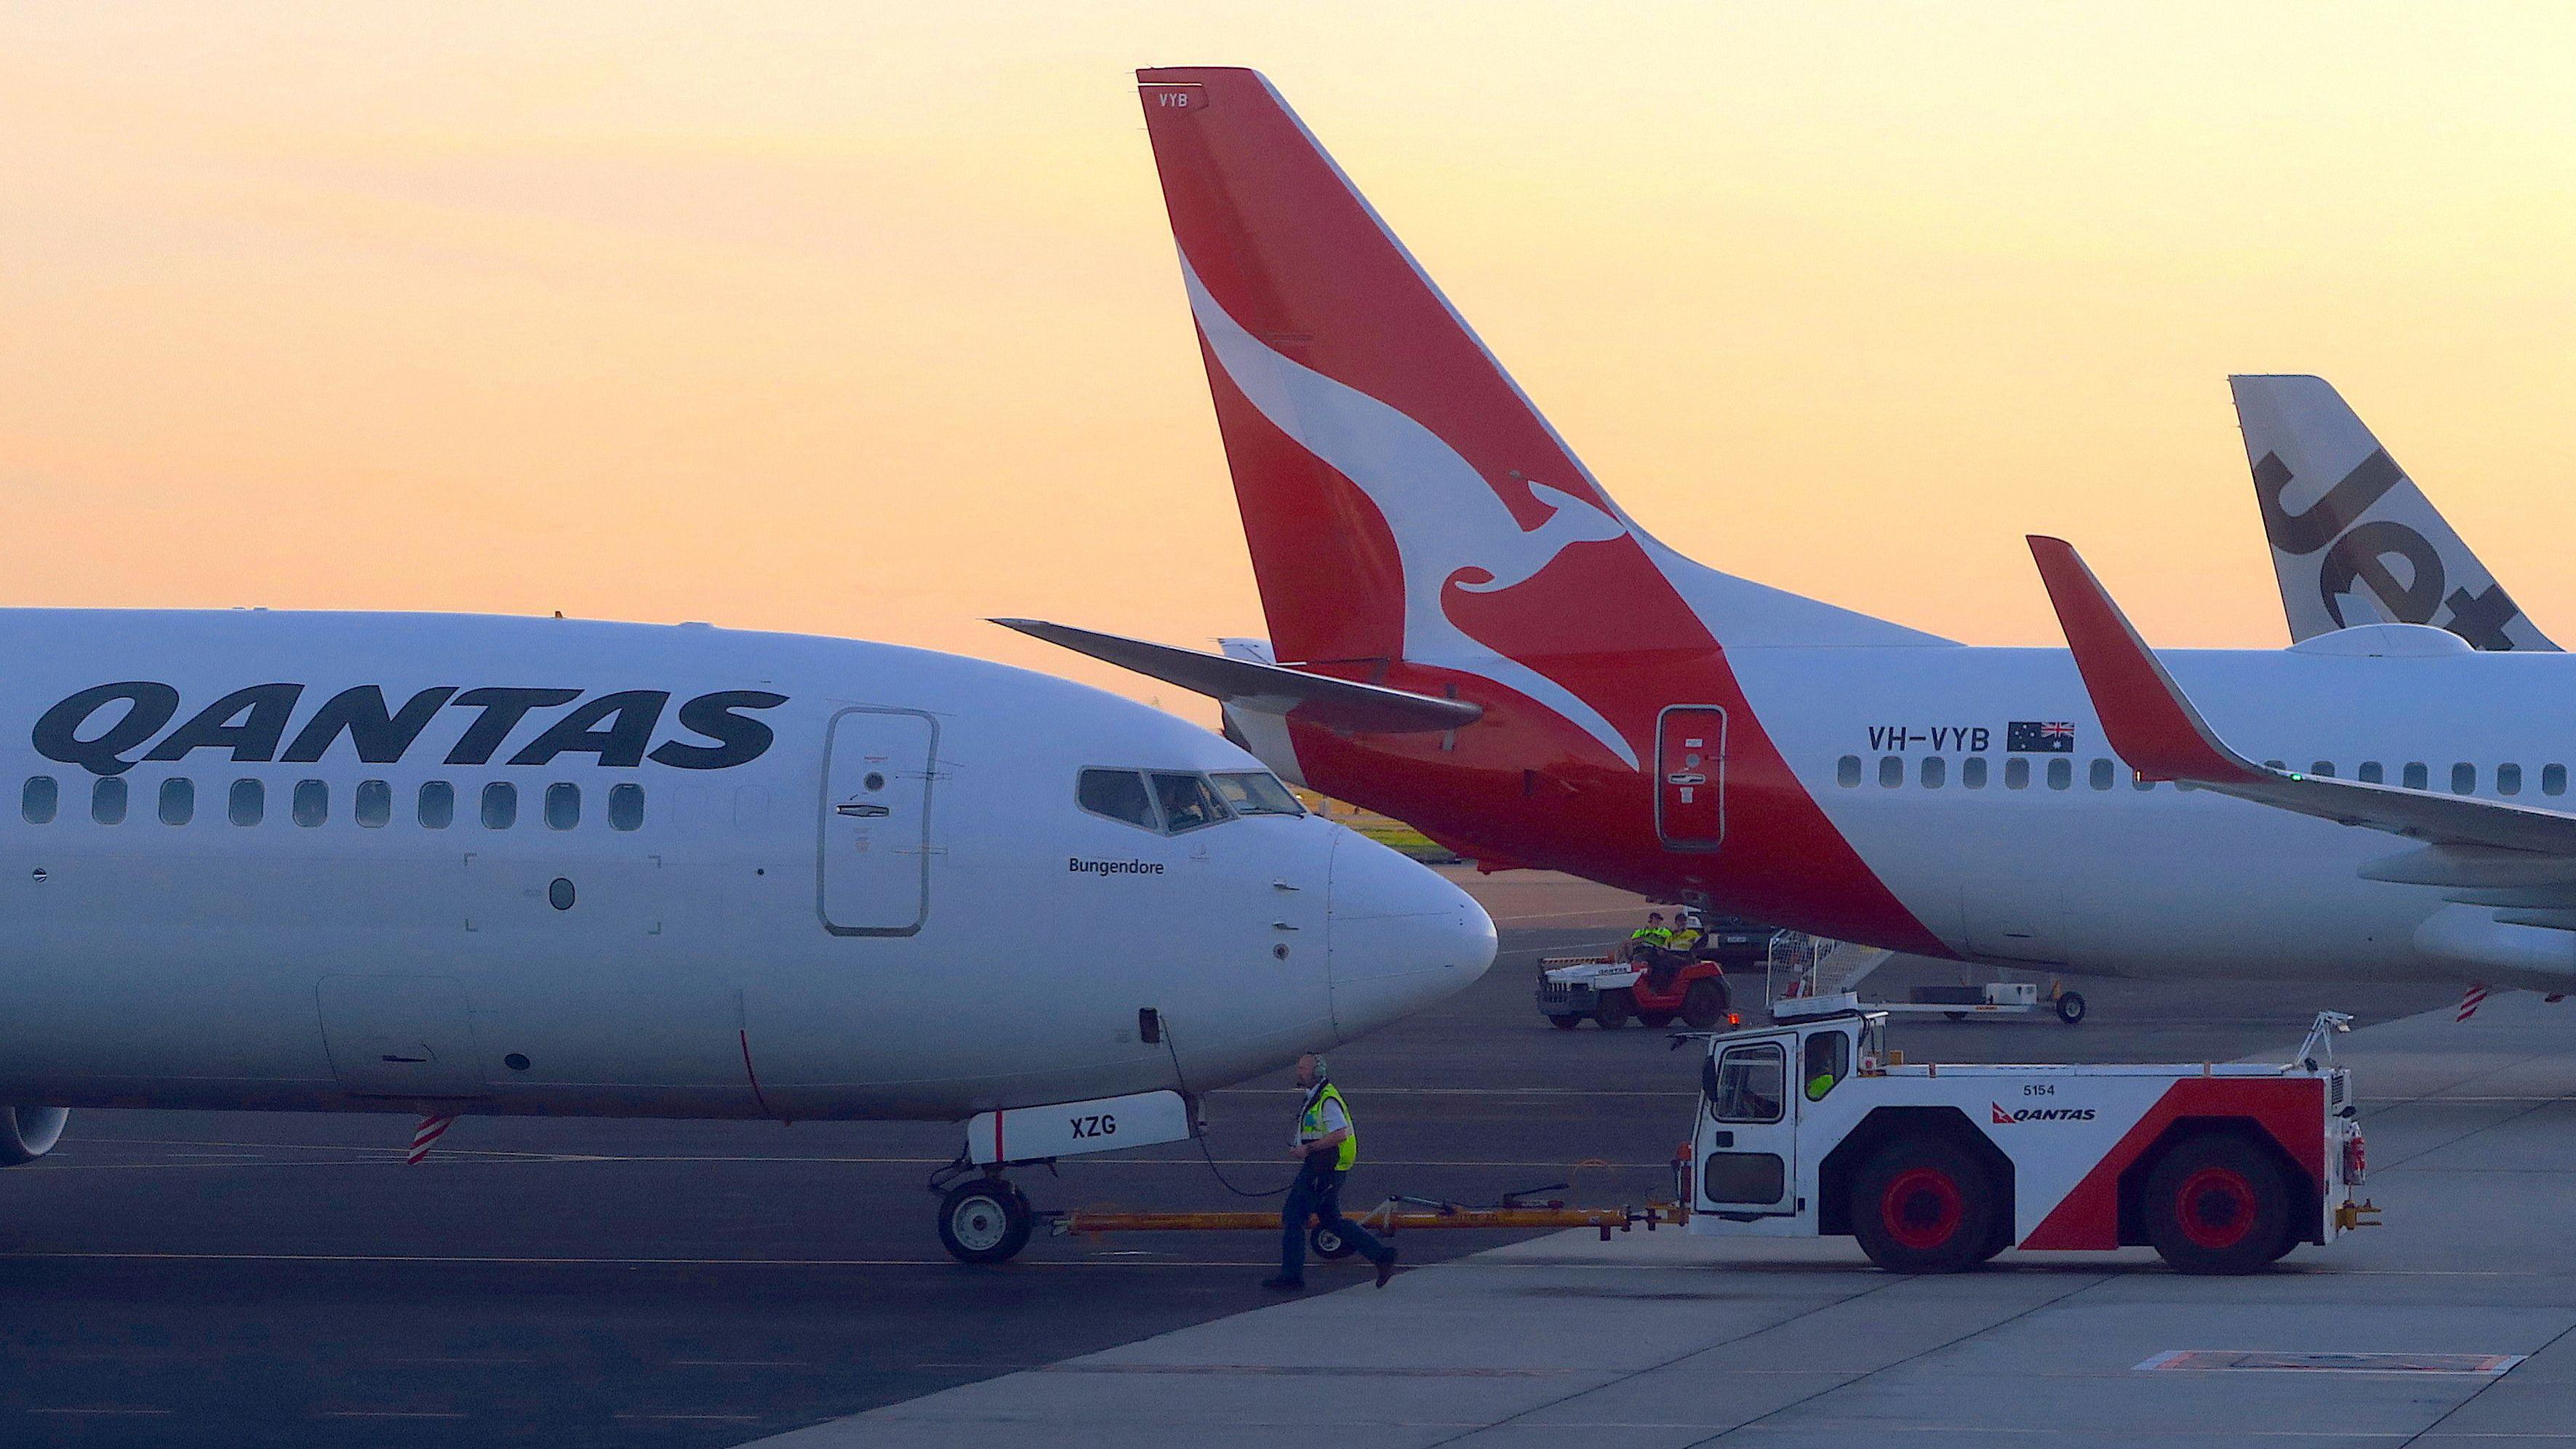 Qantas agrees payouts over ghost flights